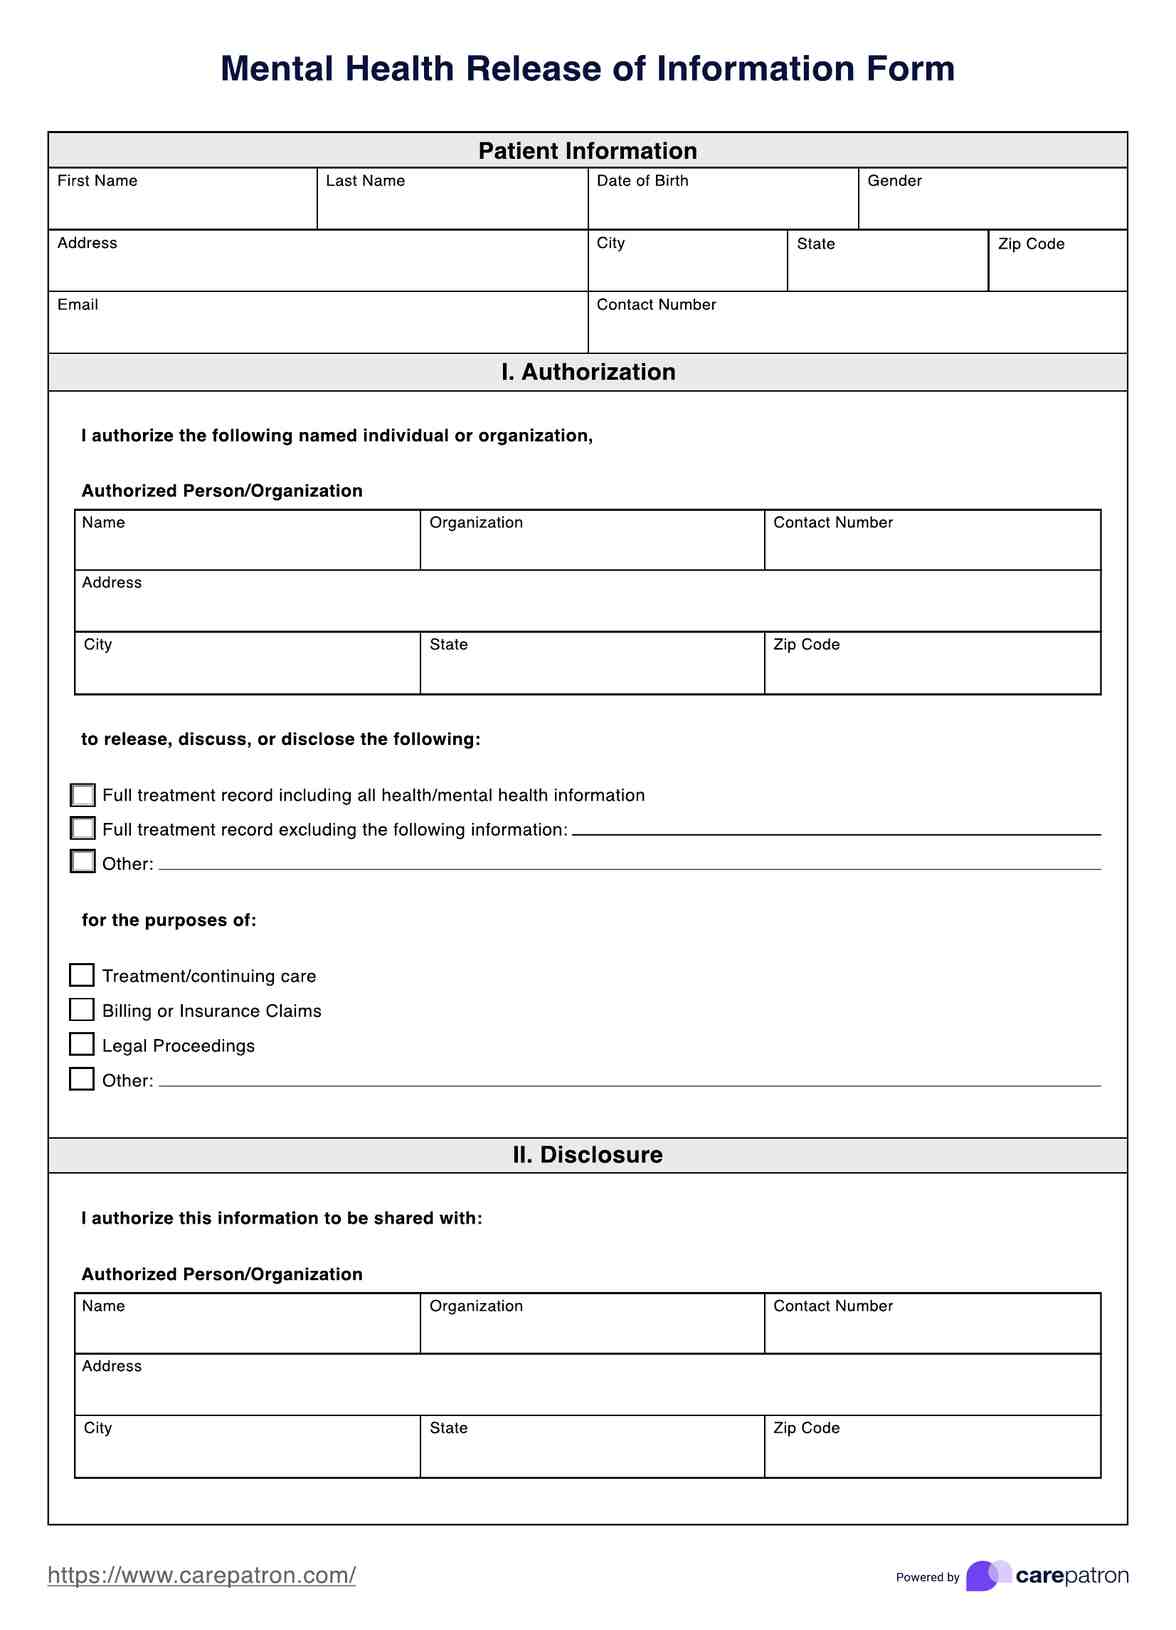 Mental Health Release Of Information Form PDF Example